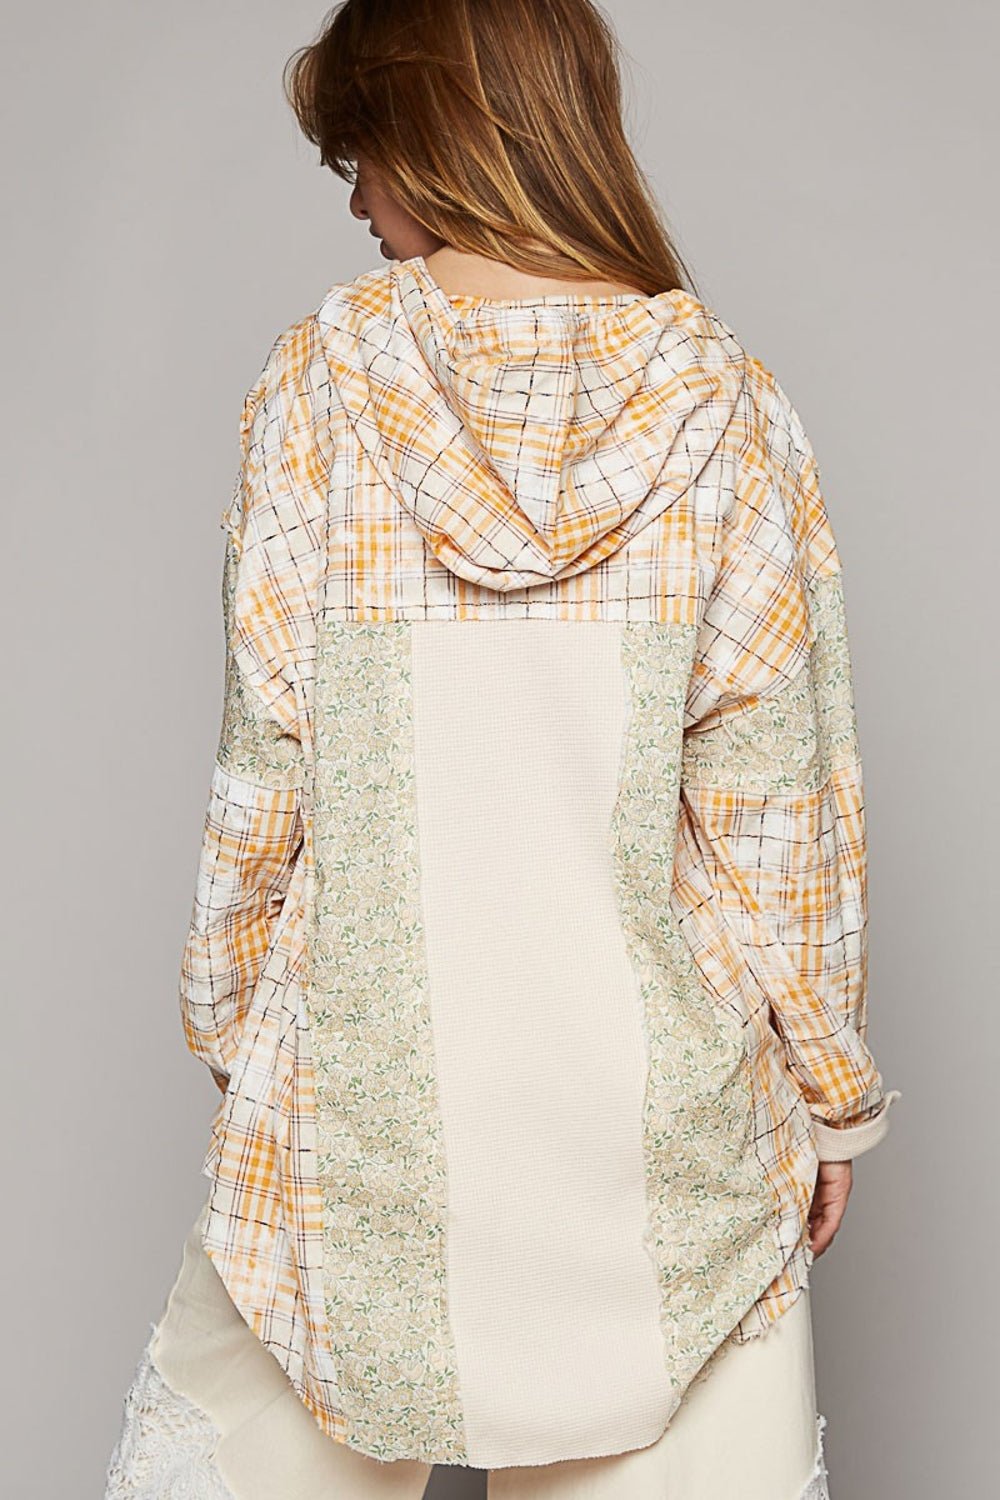 POL Long Sleeve Knit Mixed Hoodie Plaid Shirt - Happily Ever Atchison Shop Co.